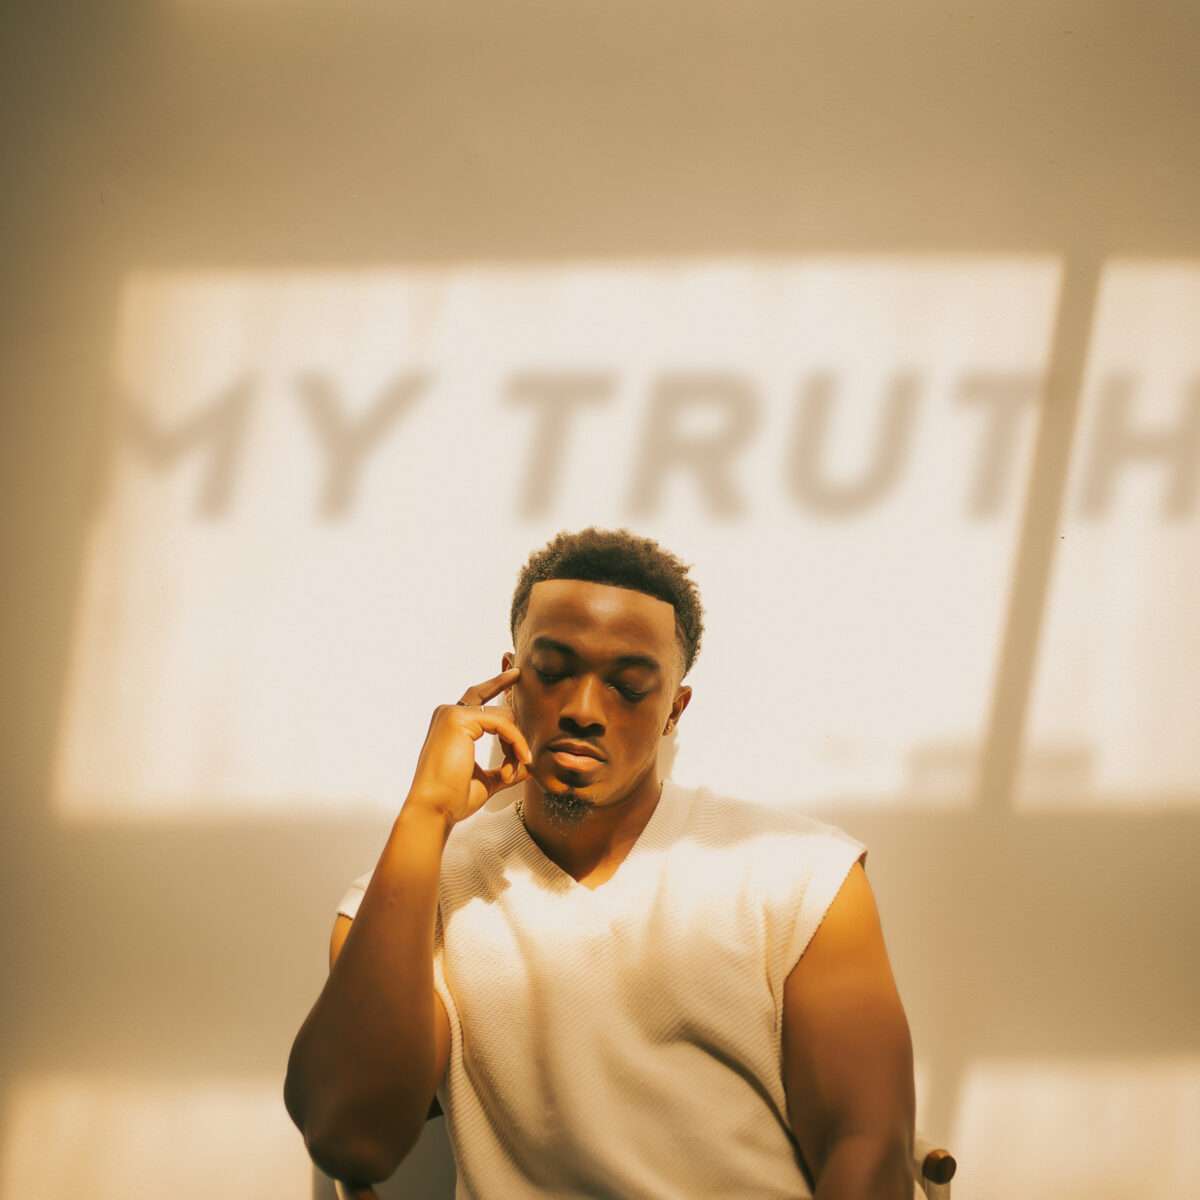 jonathan-mcreynolds-releases-new-album,-“my-truth”-+-announces-spring-tour